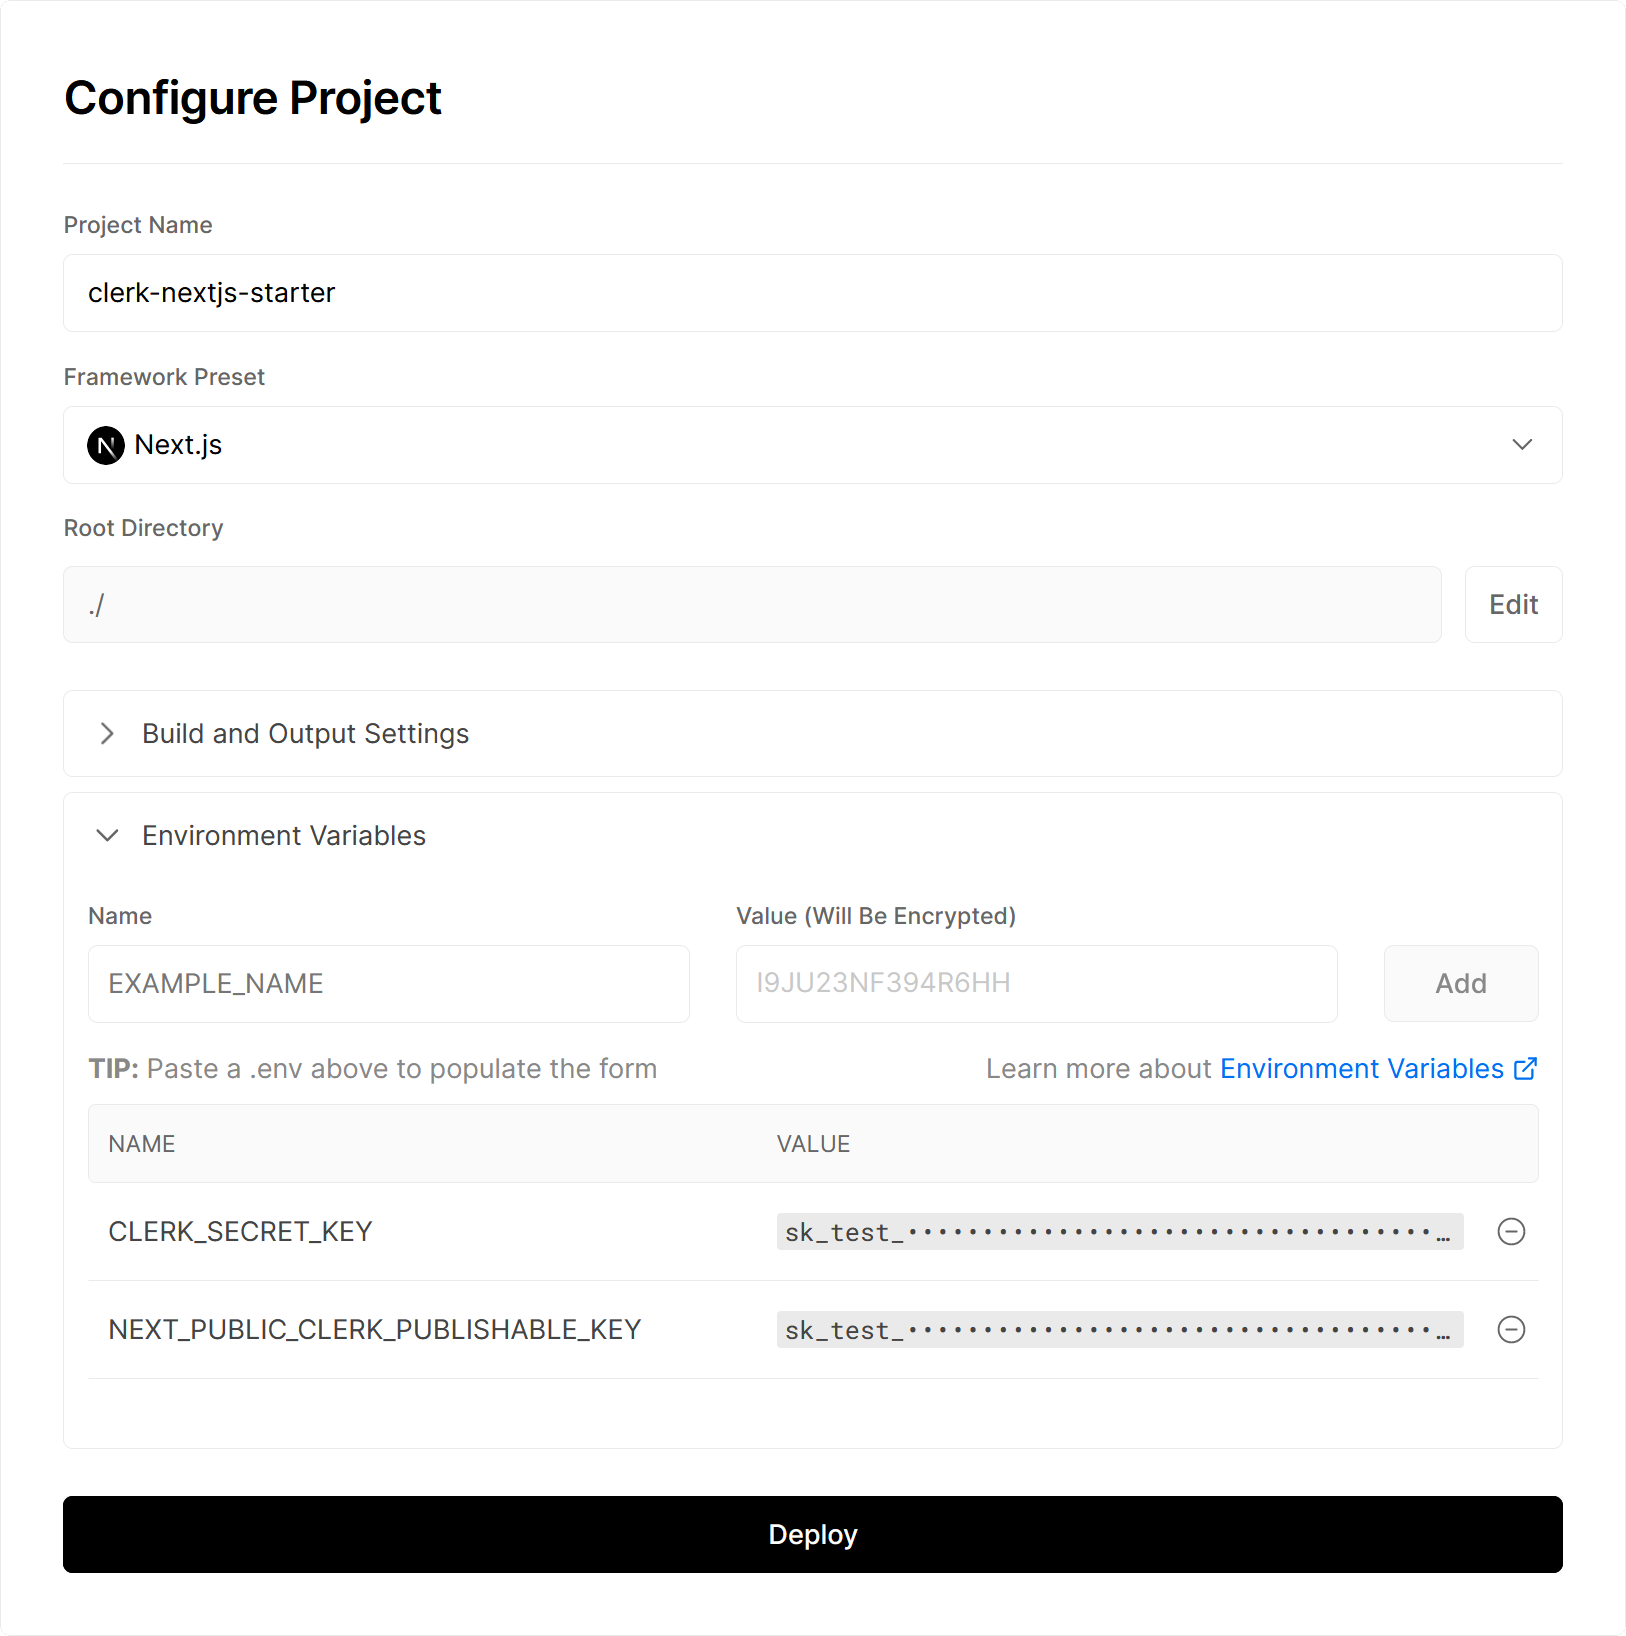 The "Configure Project" page allows you to add environment variables, select a framework preset, and more